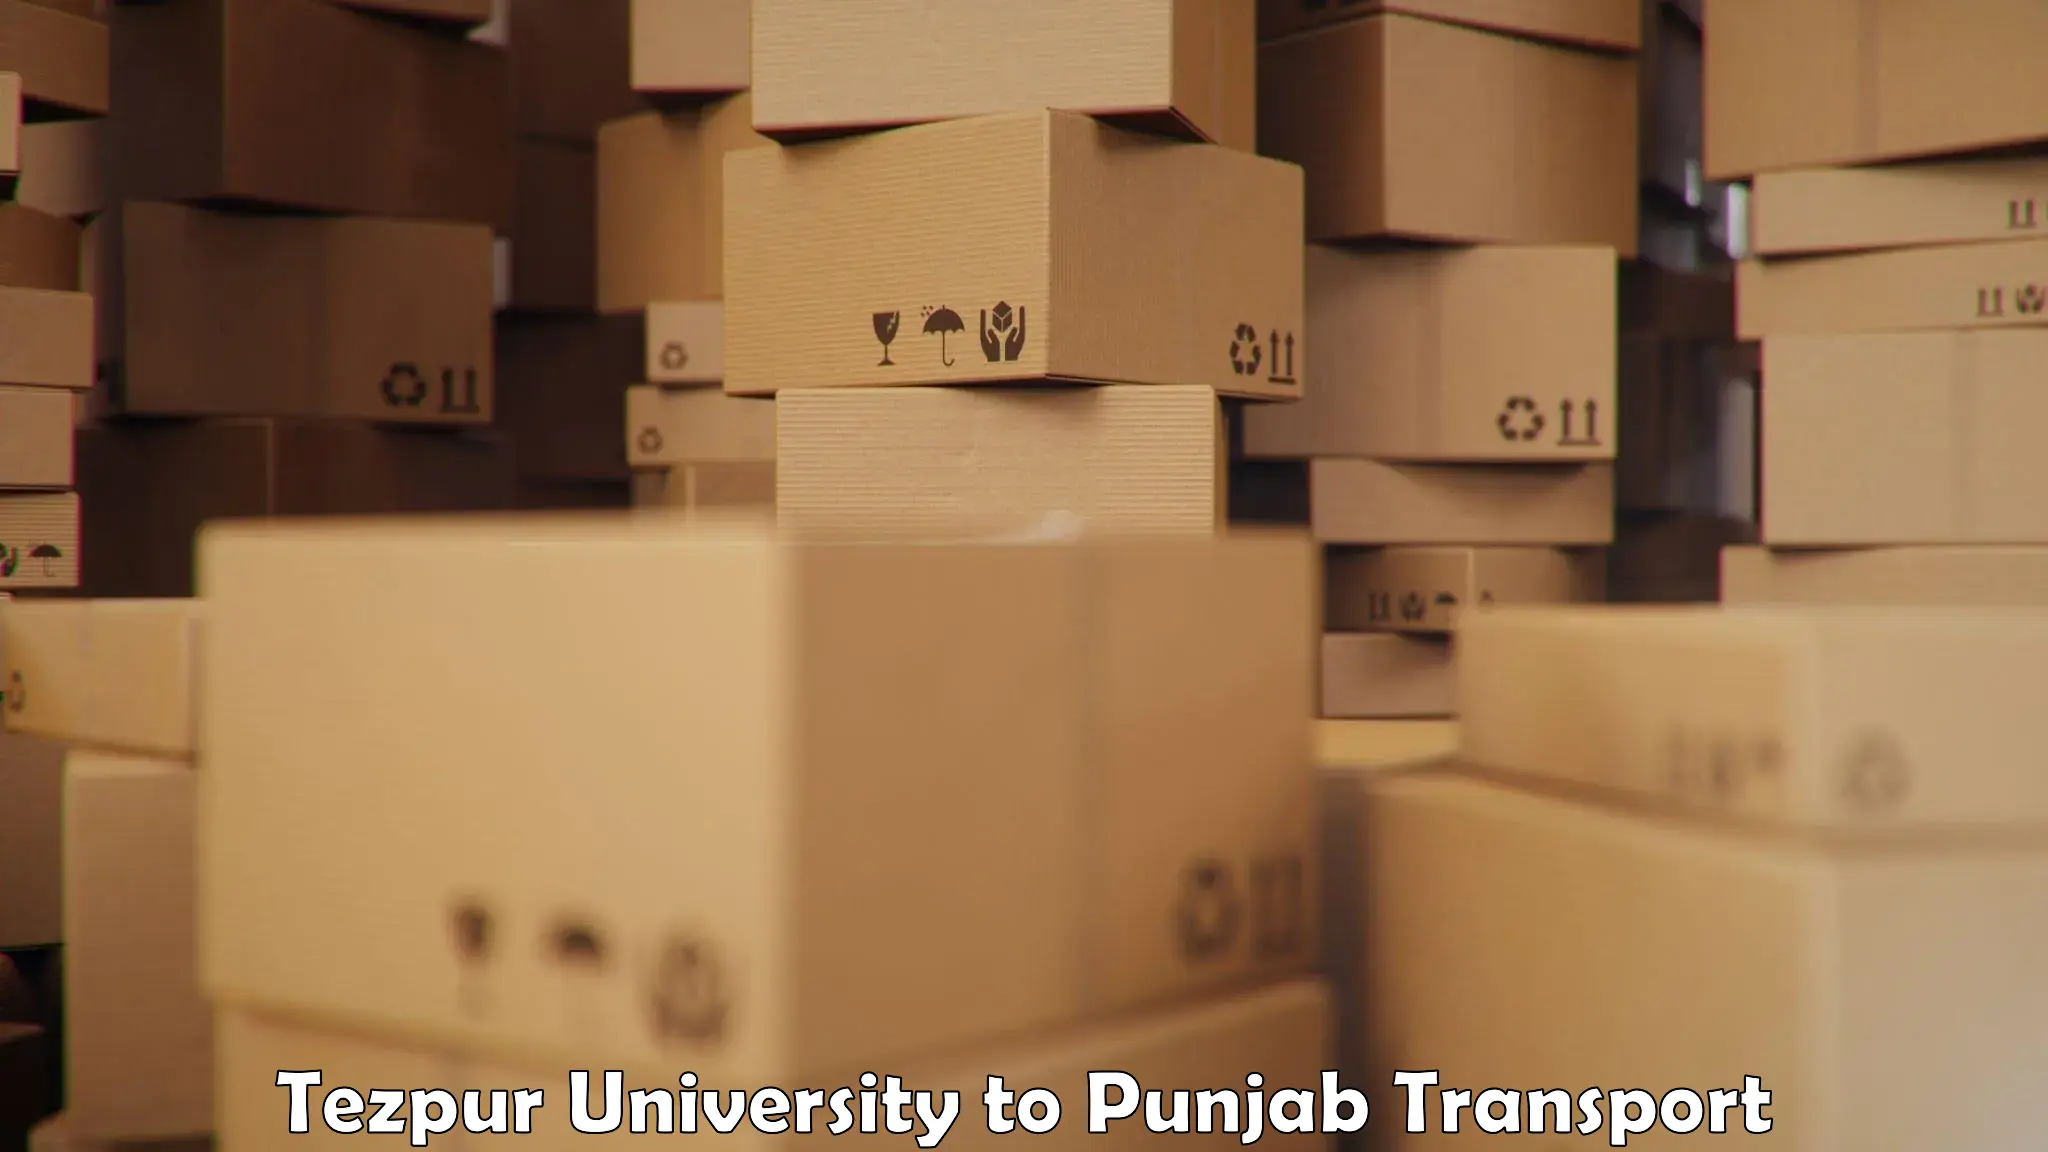 Air cargo transport services Tezpur University to Mohali